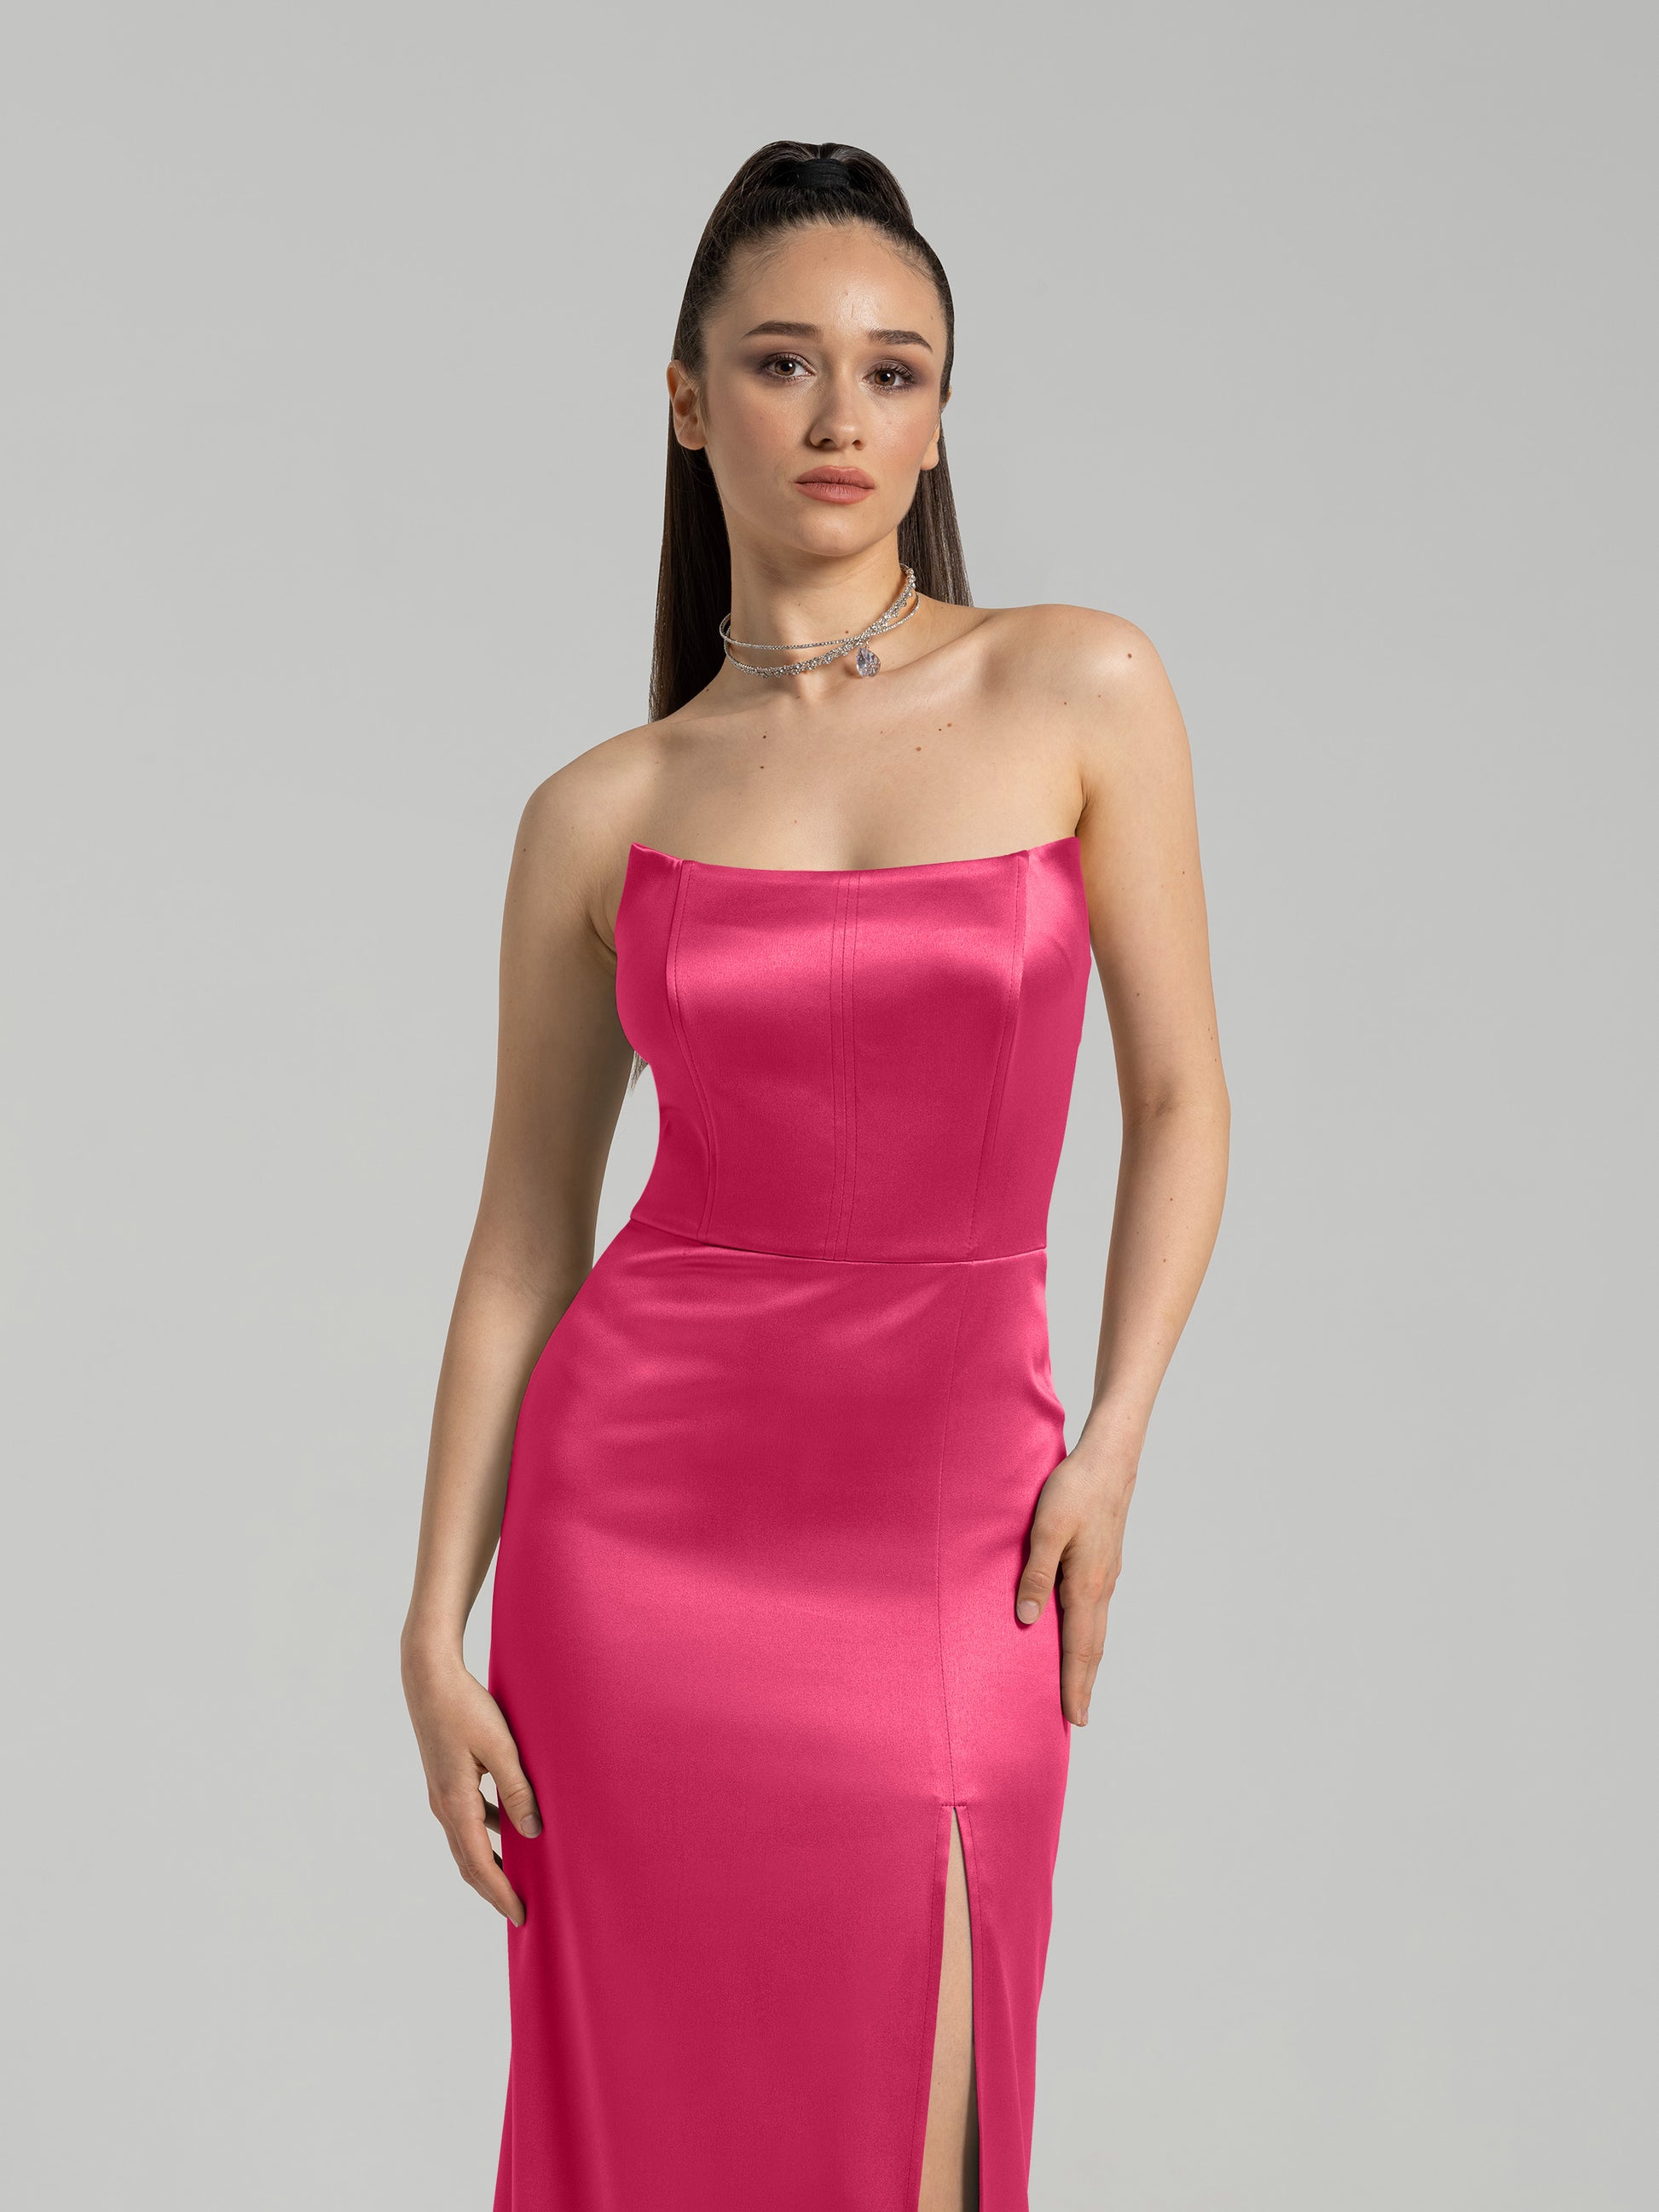 Queen of Hearts Satin Maxi Dress - Hot Pink by Tia Dorraine Women's Luxury Fashion Designer Clothing Brand